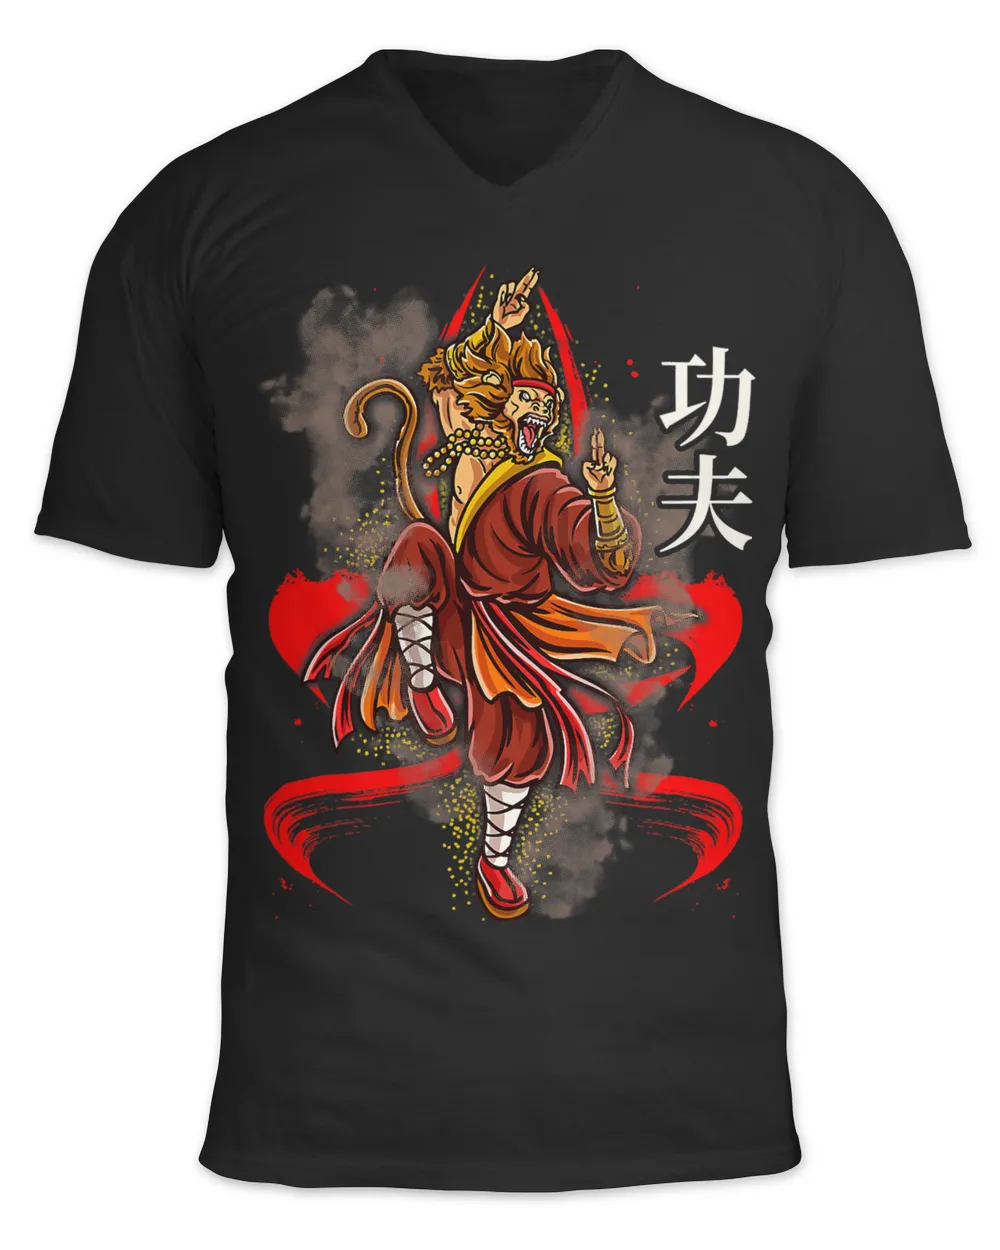 Monkey King in Fierce Kung Fu Kick with Chinese Calligraphy